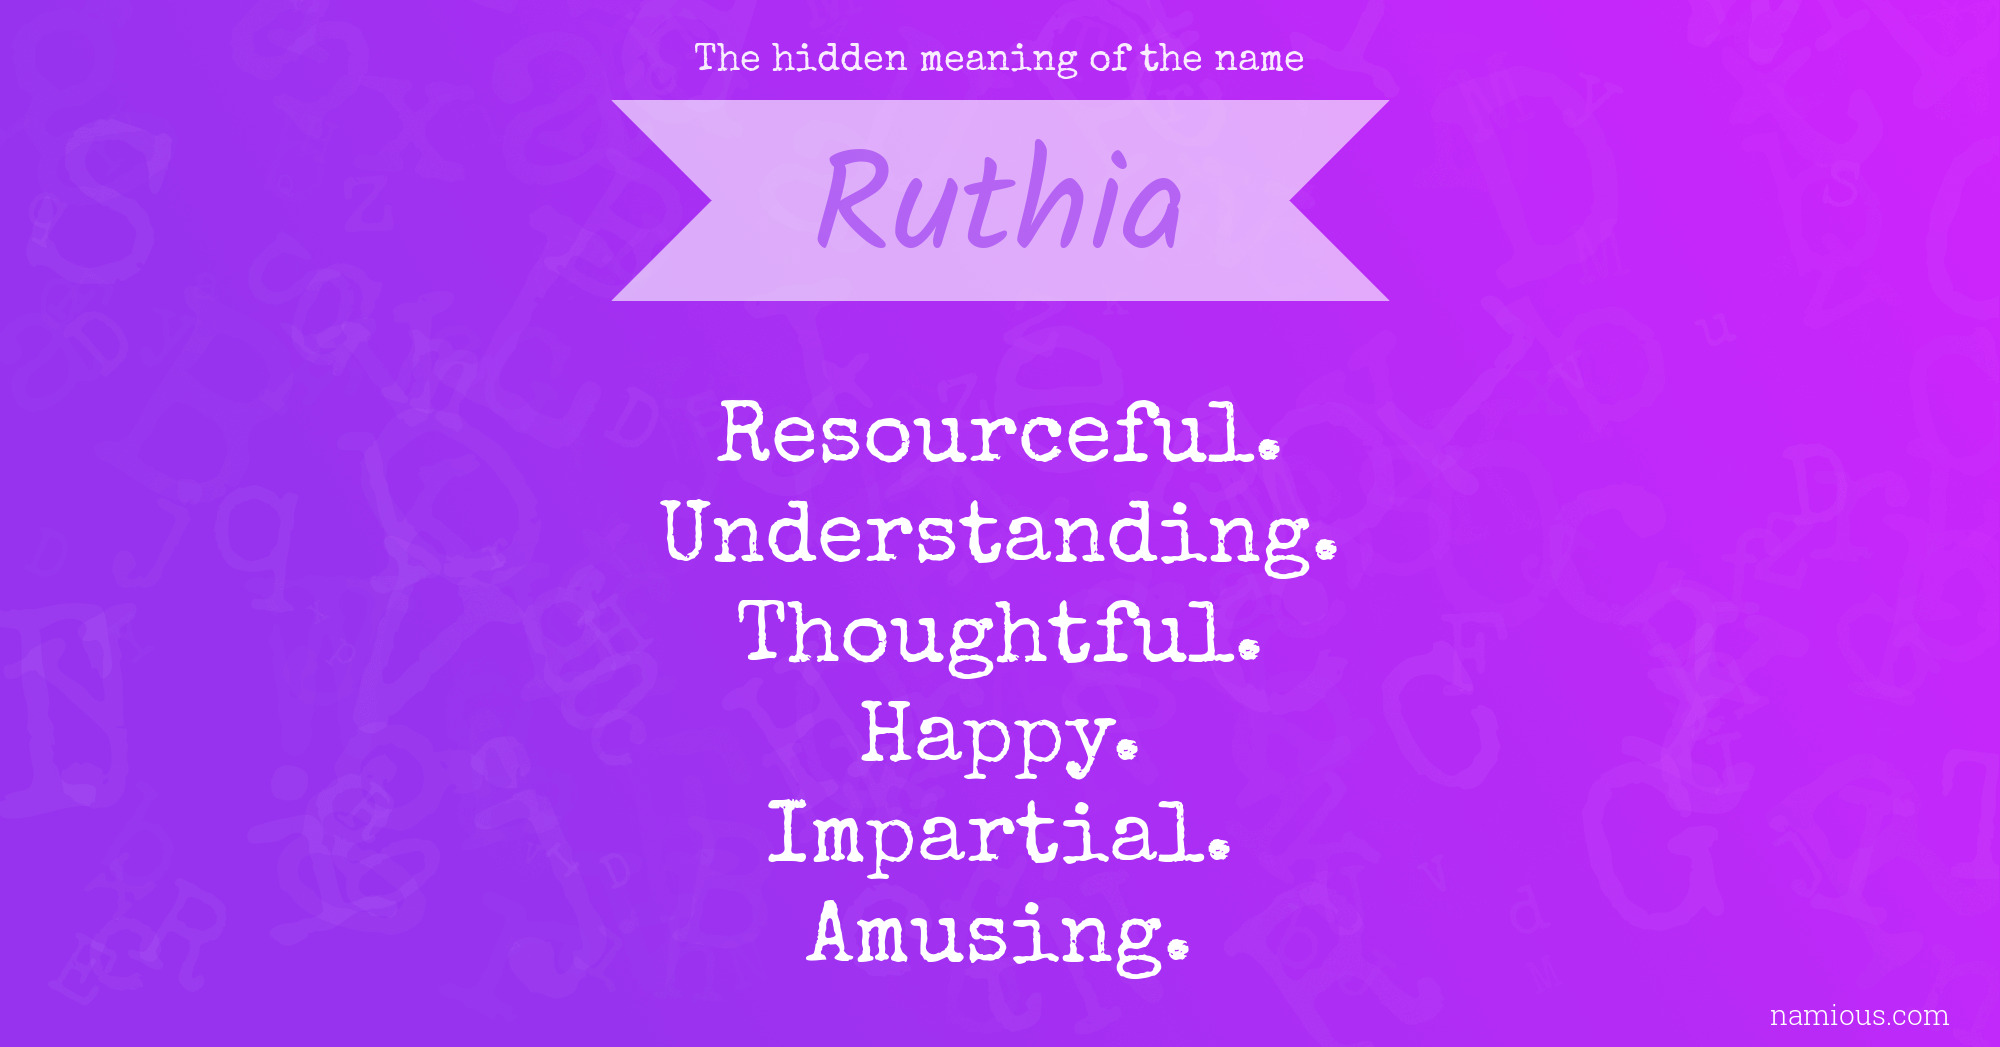 The hidden meaning of the name Ruthia